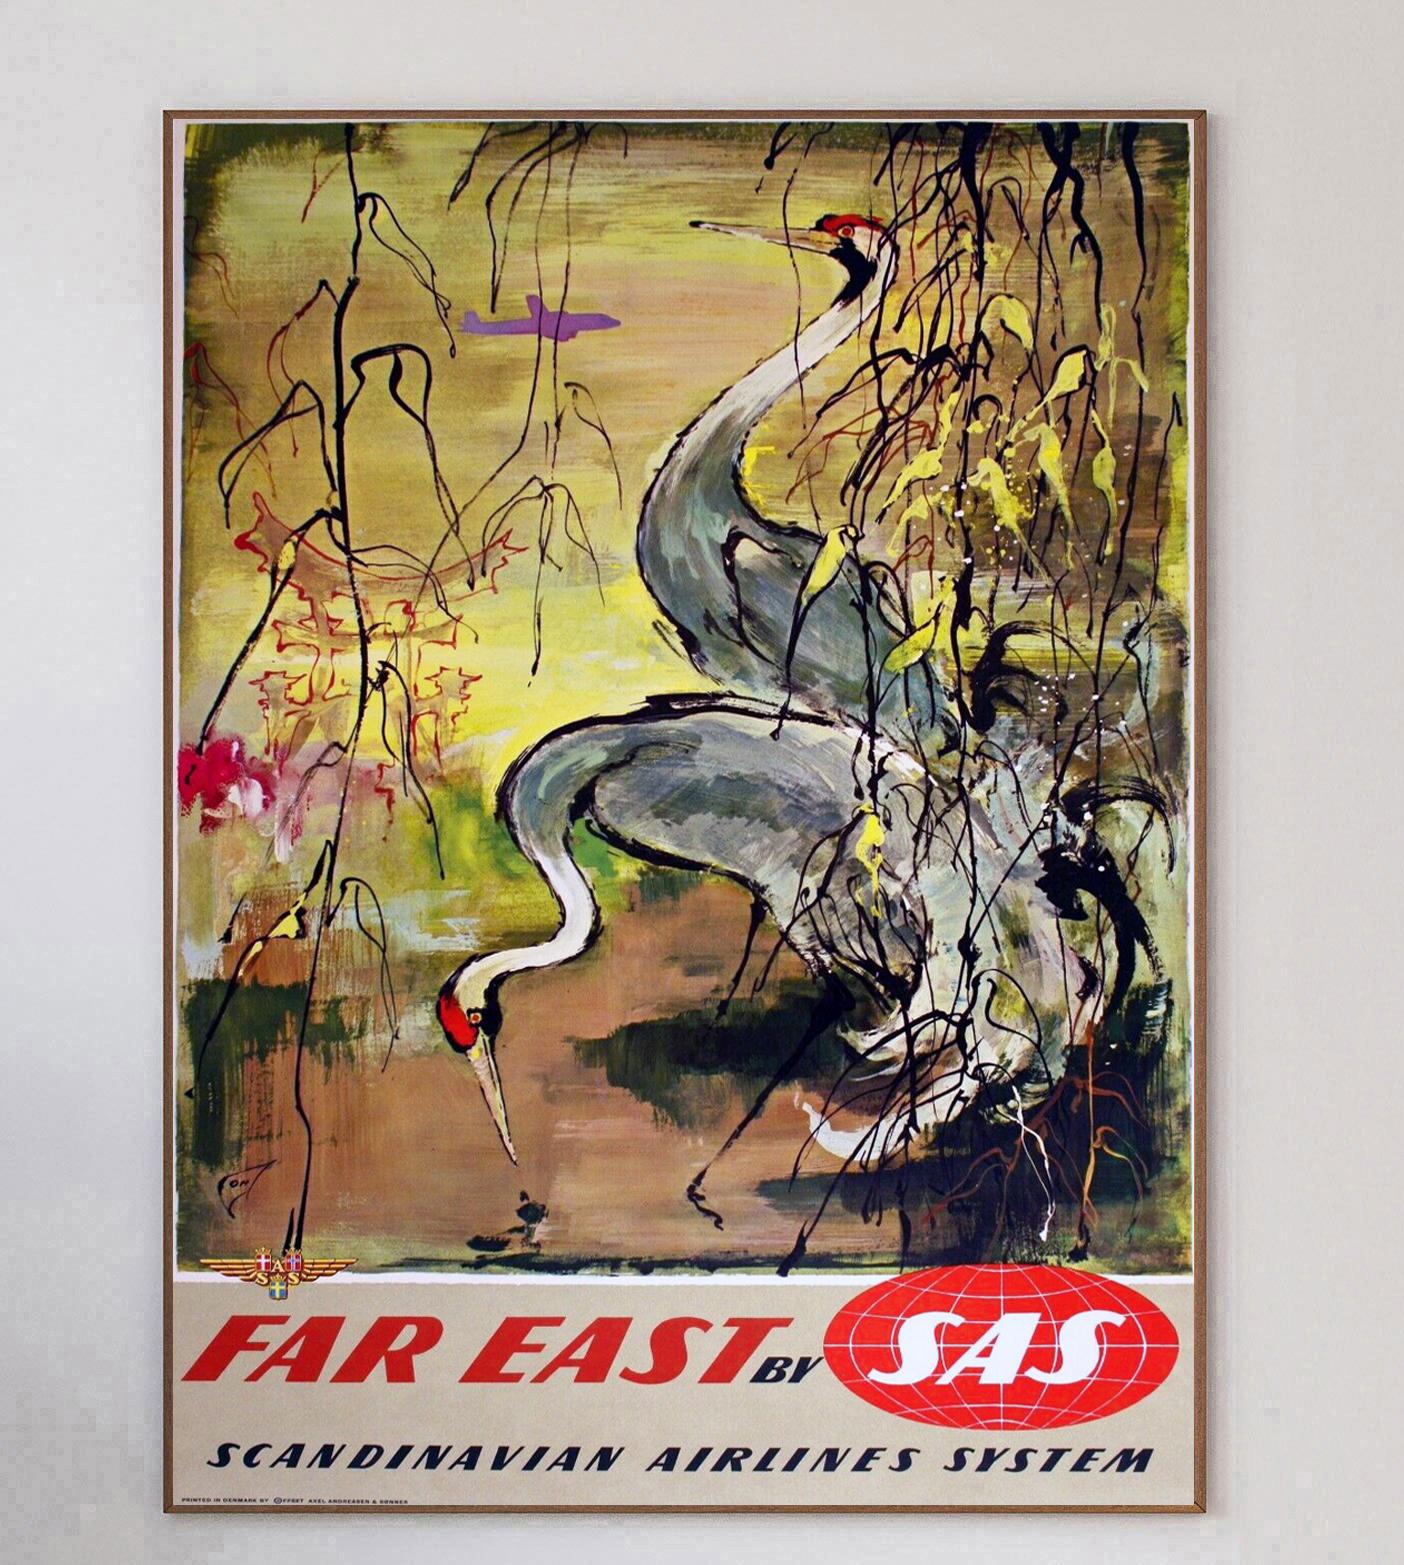 With fabulous artwork from Danish artist Otto Nielsen who worked on many SAS posters of the era, this poster promoting the Scandinavian airlines routes to the Far East was created in 1955. Founded in 1946, Scandinavian Airline System or SAS is the